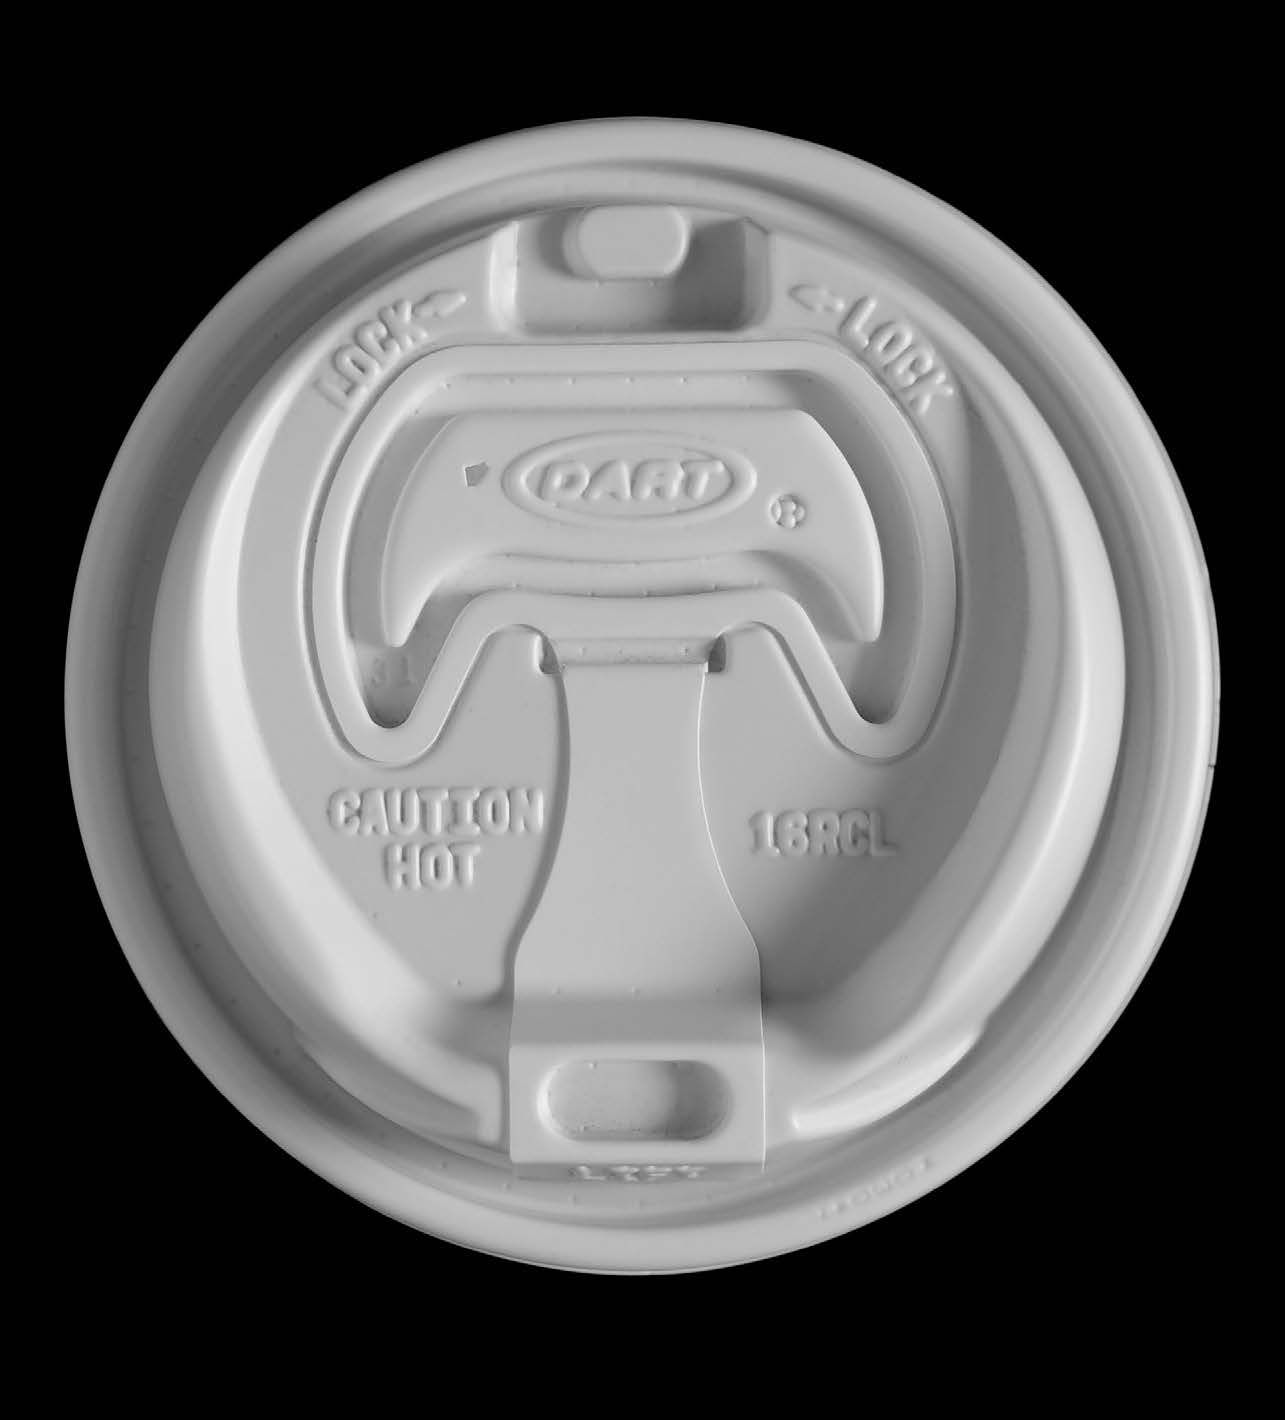 Takeaway coffee cup lids: How the design affects customers